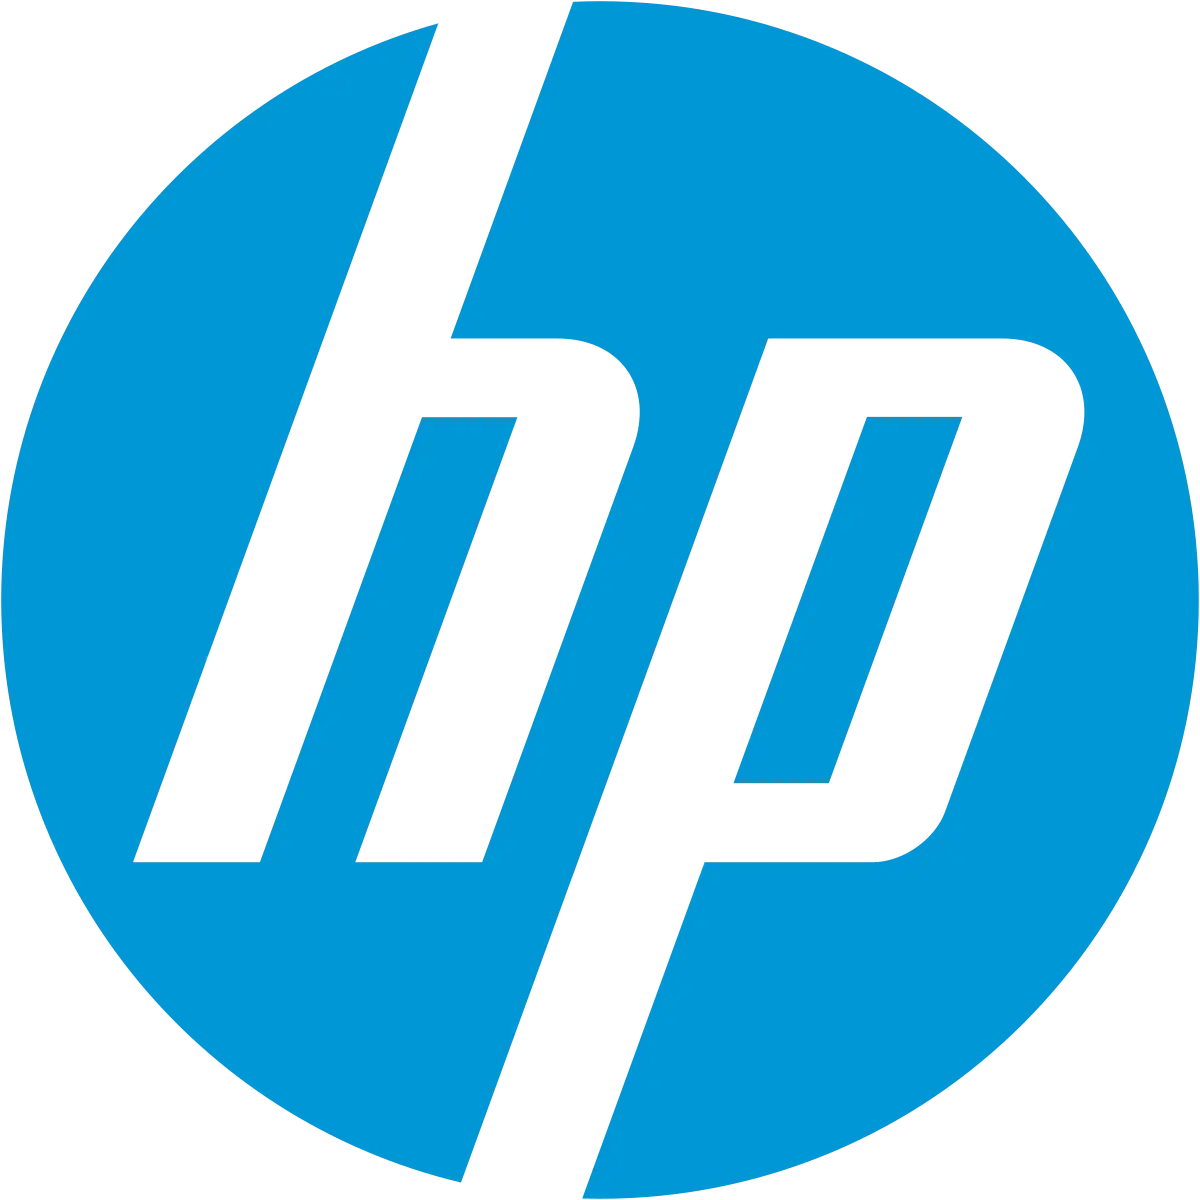 hewlett packard advertising agency - What is a professional advertising agency